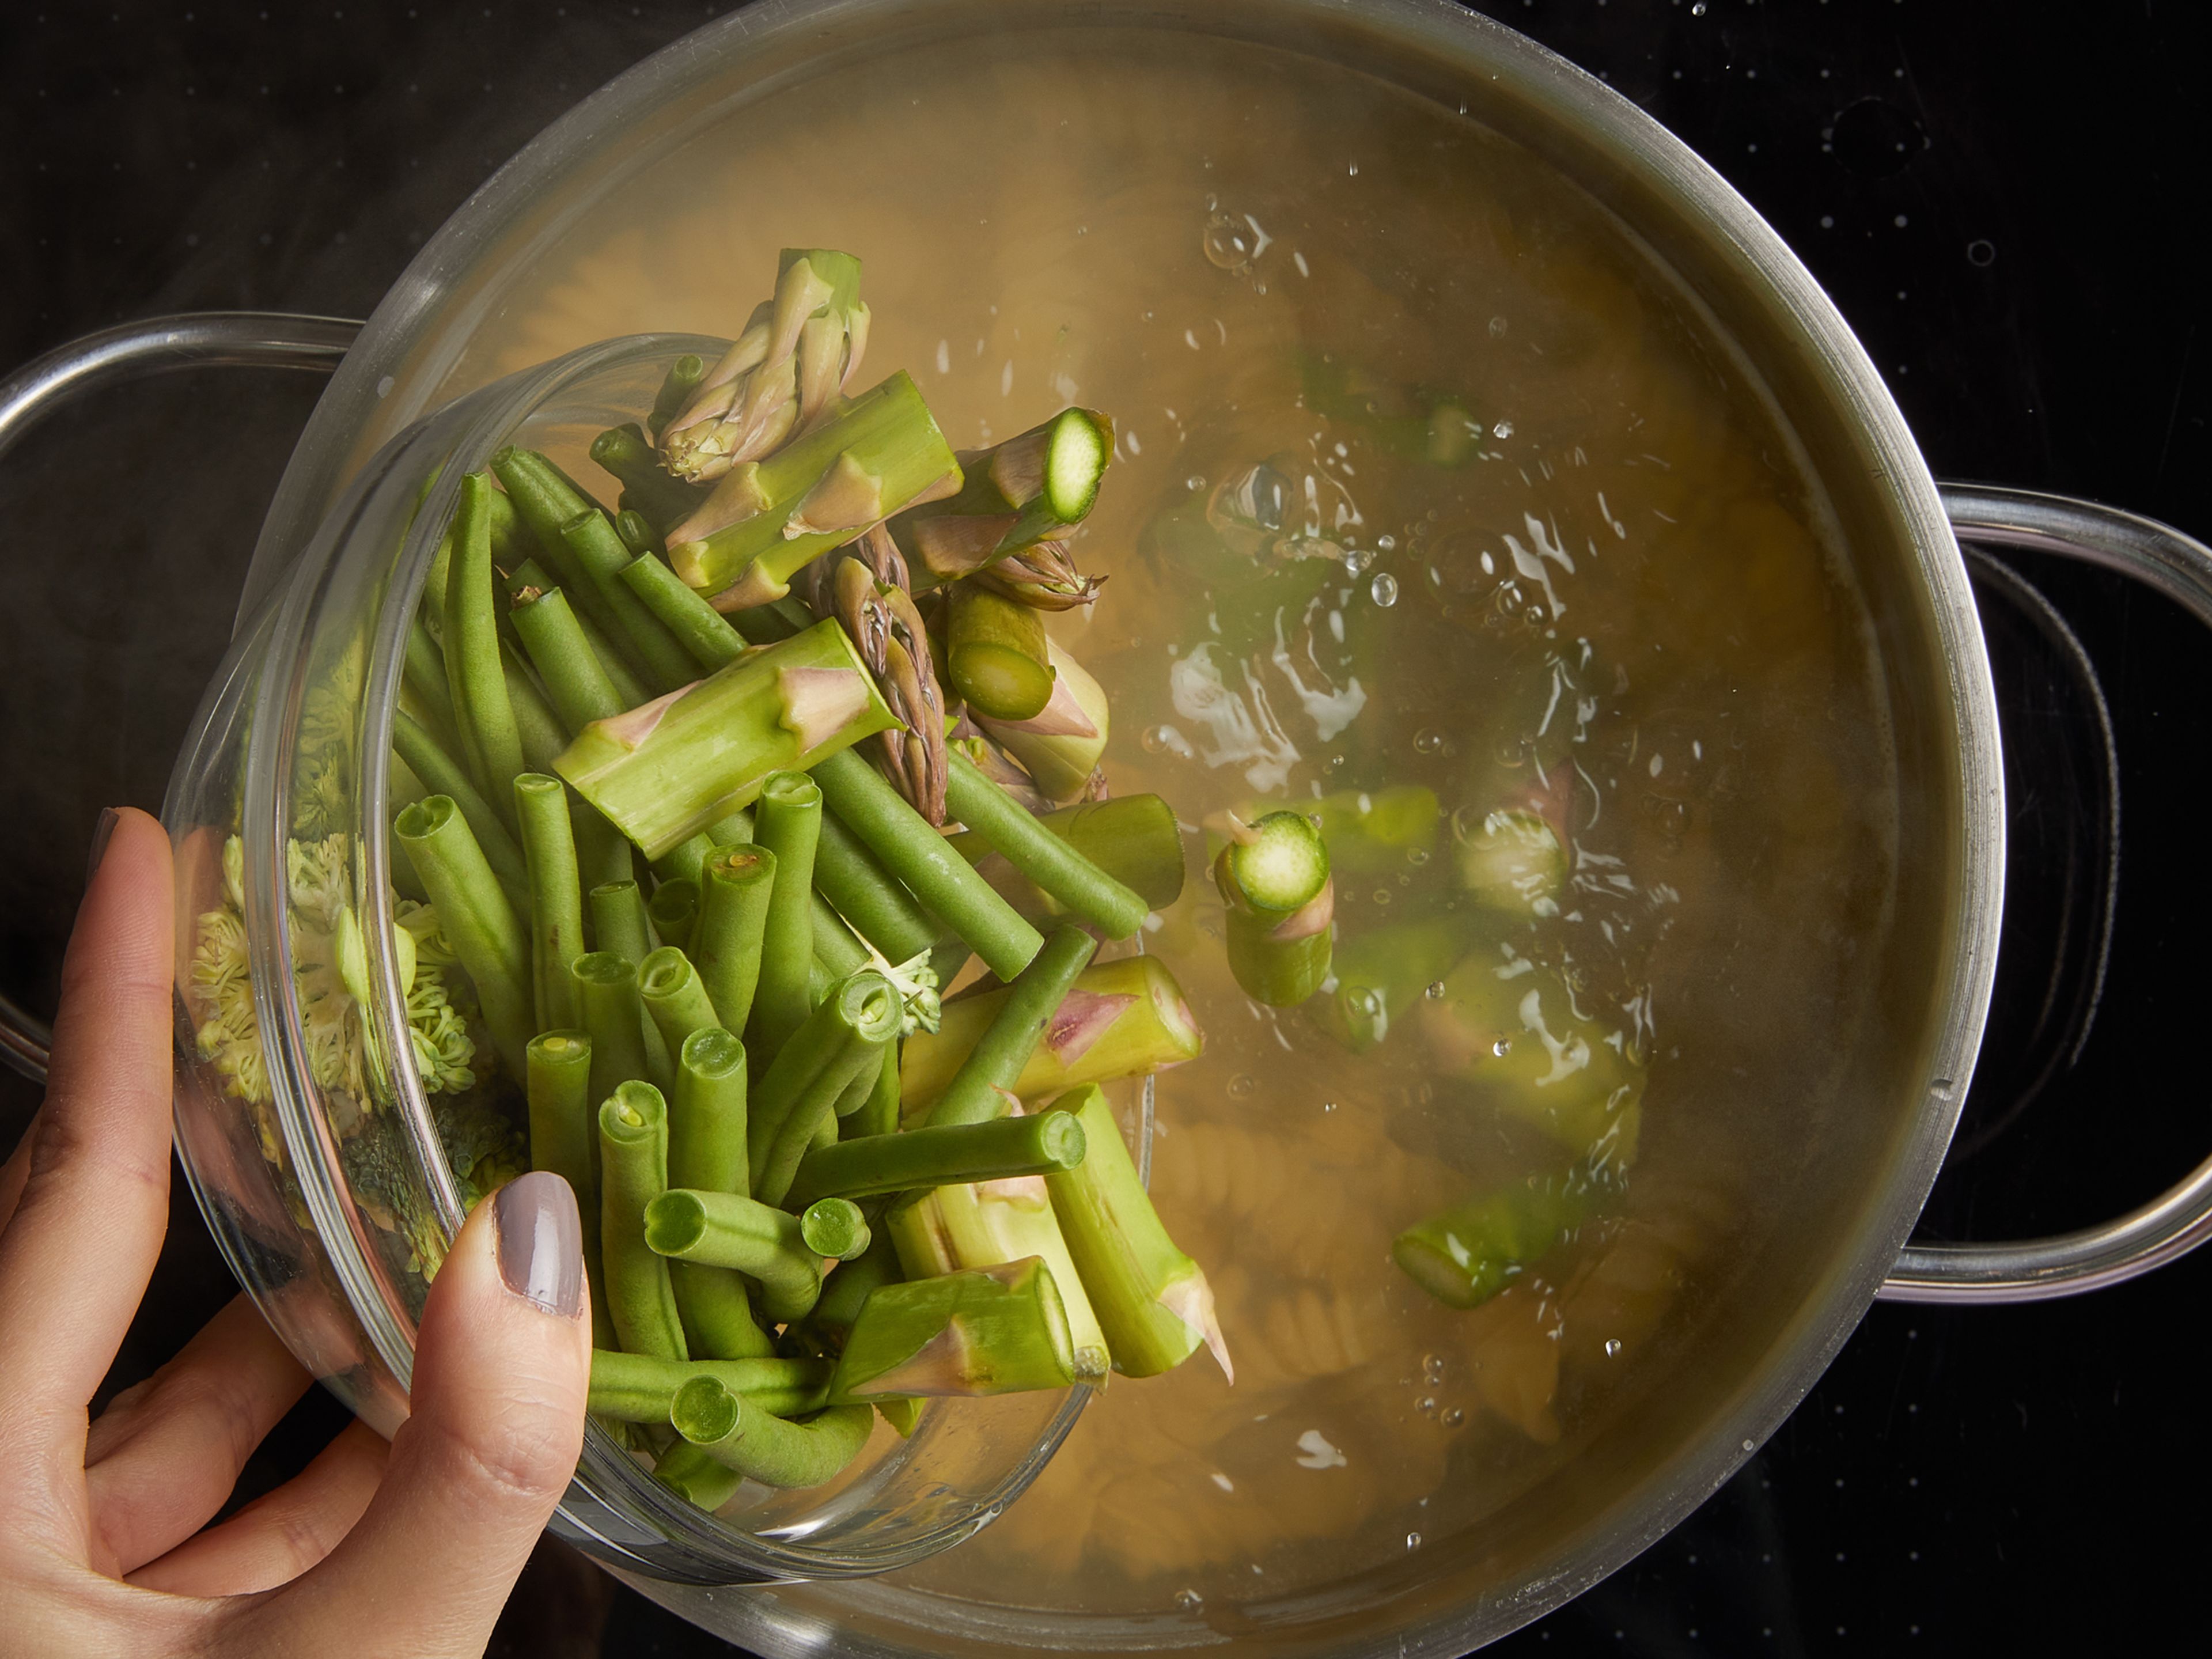 Approx. 5 min. before the pasta cooking time is up, add green beans and asparagus to the pot. Let cook for approx. 3 min., then add broccoli florets. Drain the pasta and vegetables, reserving some of the pasta water in a small bowl or mug.